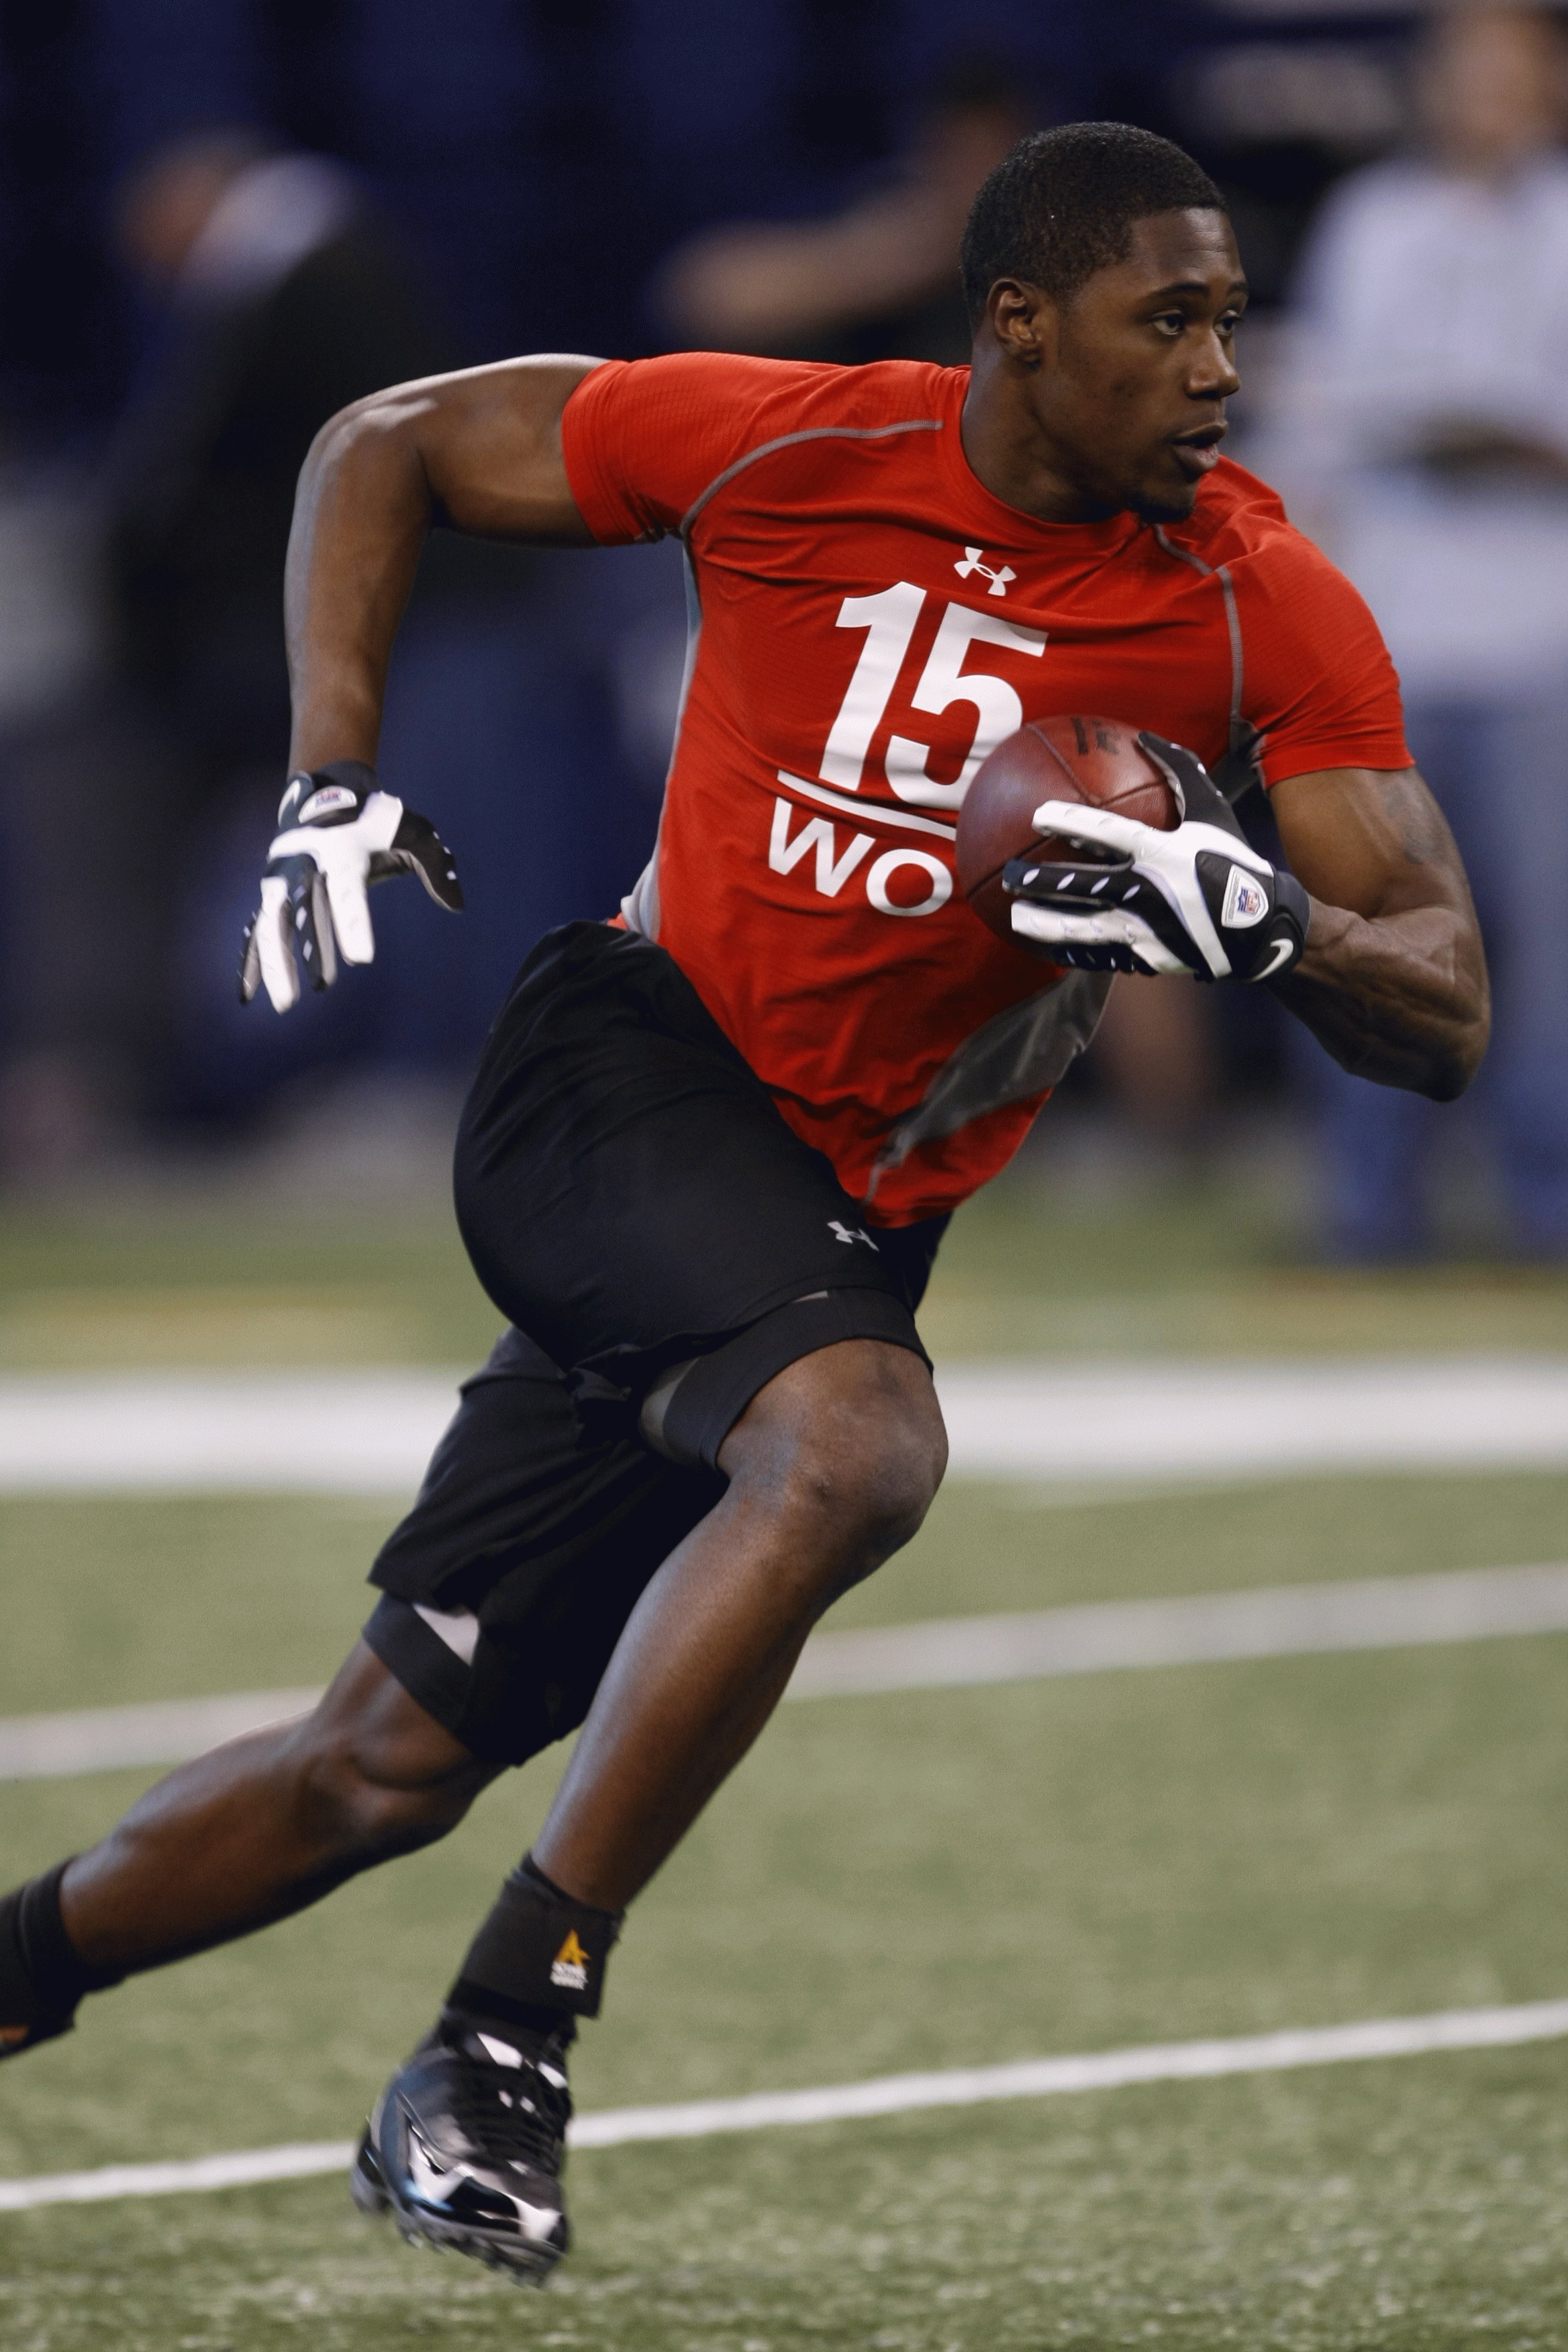 INDIANAPOLIS, IN - FEBRUARY 22:  Wide receiver Darrius Heyword-Bey of Maryland catches the football during the NFL Scouting Combine presented by Under Armour at Lucas Oil Stadium on February 22, 2009 in Indianapolis, Indiana. (Photo by Scott Boehm/Getty I